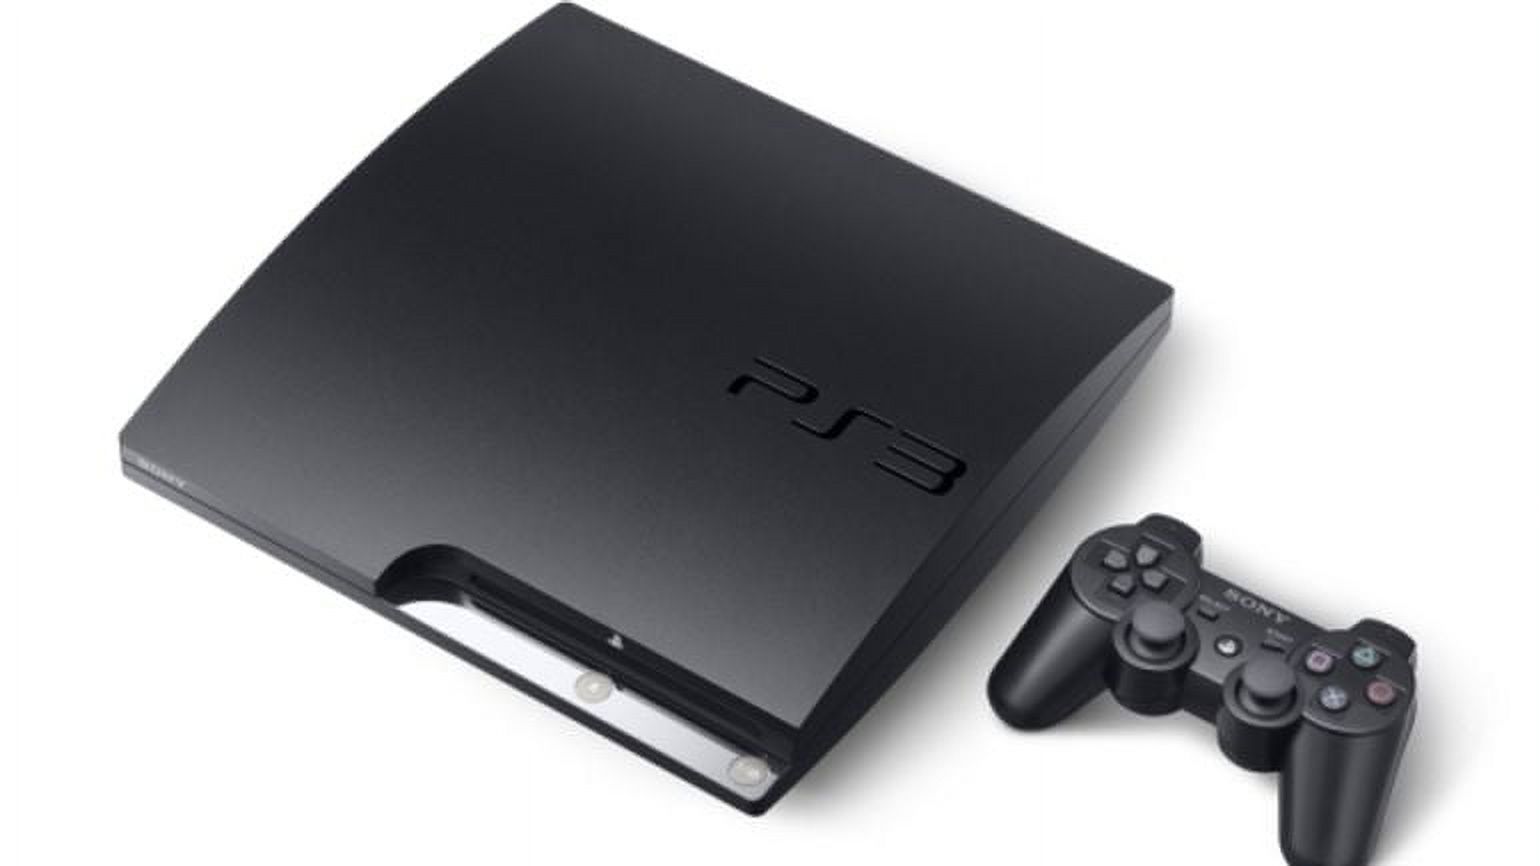 Sony Playstation 3 160GB System - image 2 of 4